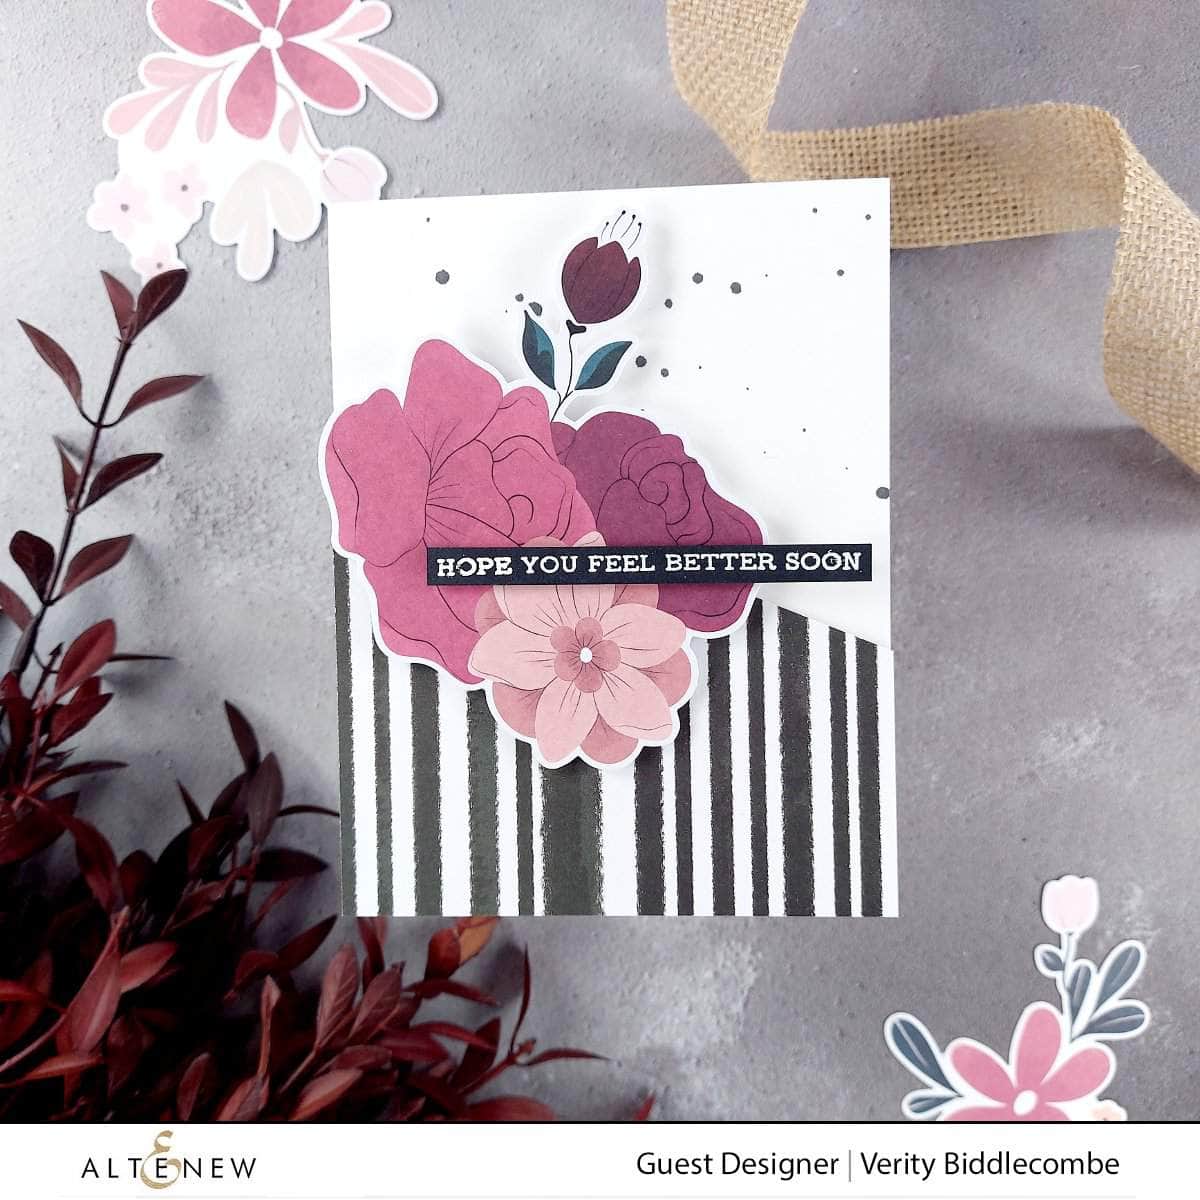 Pexzuh Printing Pattern Paper Wildflower Paper Crafting Collection 12x12 Paper Pack